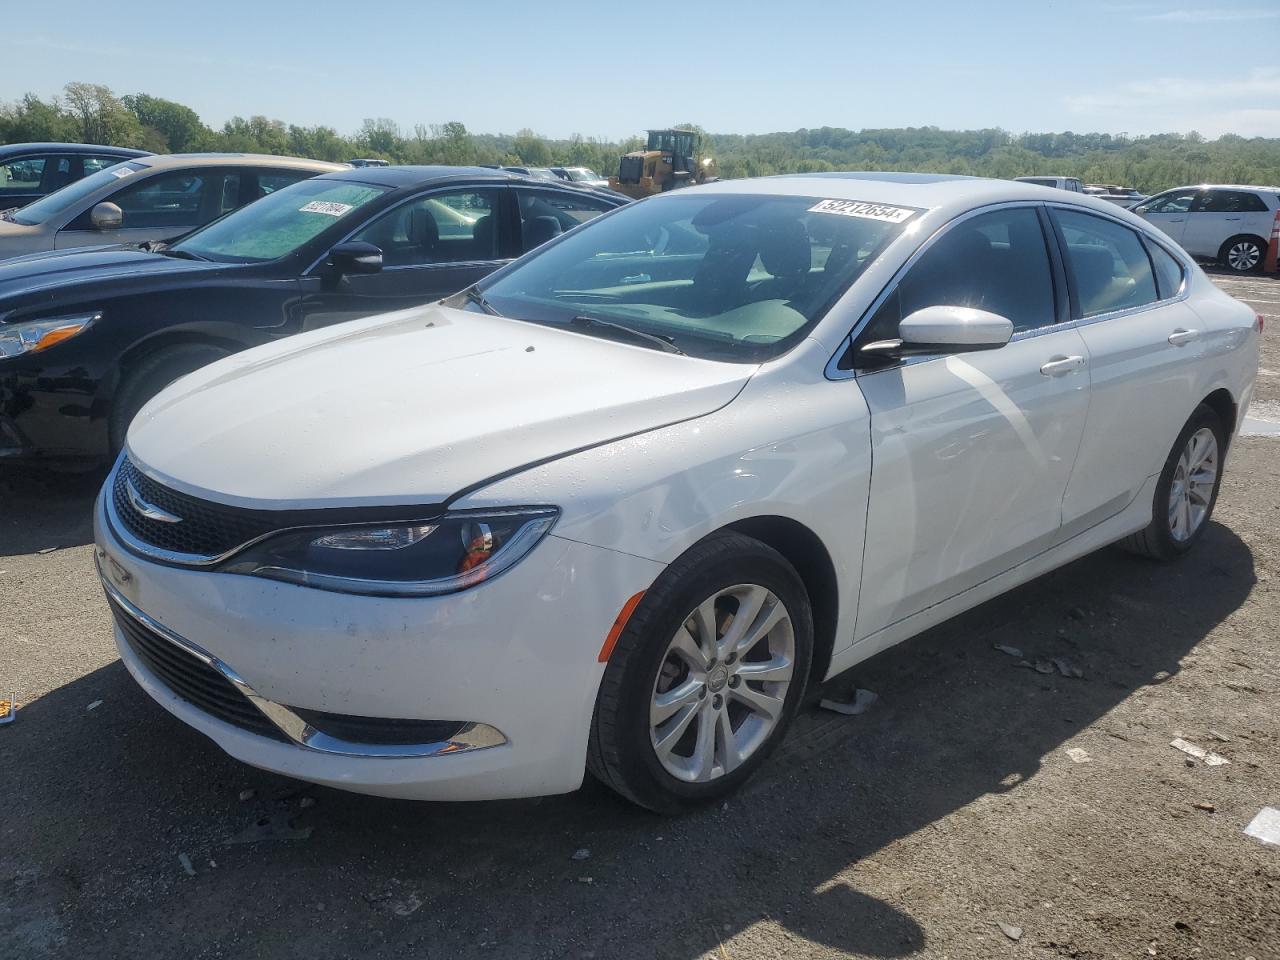 vin: 1C3CCCAB7GN170119 1C3CCCAB7GN170119 2016 chrysler 200 2400 for Sale in 62205 1001, Il - Southern Illinois, Cahokia Heights, Illinois, USA